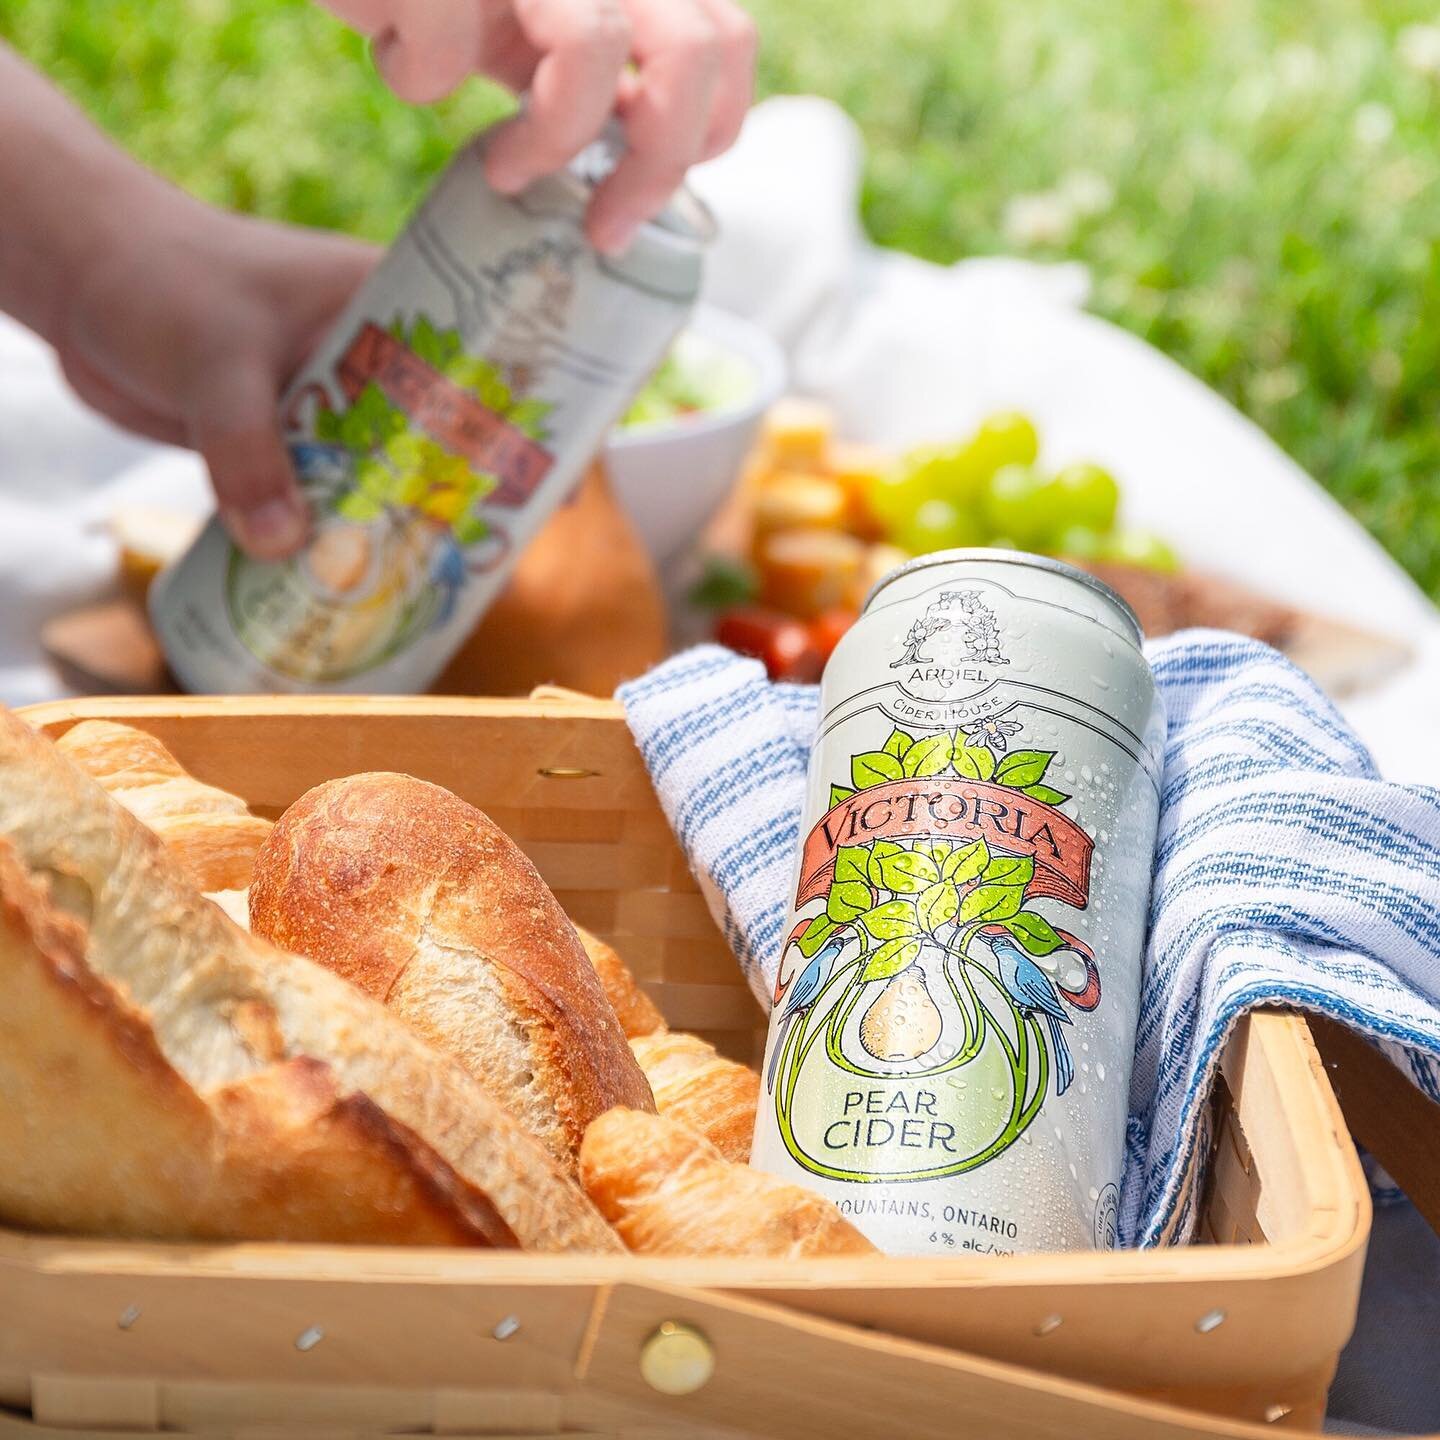 Summers are made for friendships, picnics, and Perry! 🧺 ☀️ 🥂 Our Victoria Pear Cider was crafted in recognition of the pioneering spirit of women farmers and fruit growers that contributed to the evolution of cider making. With delicate pear flavou